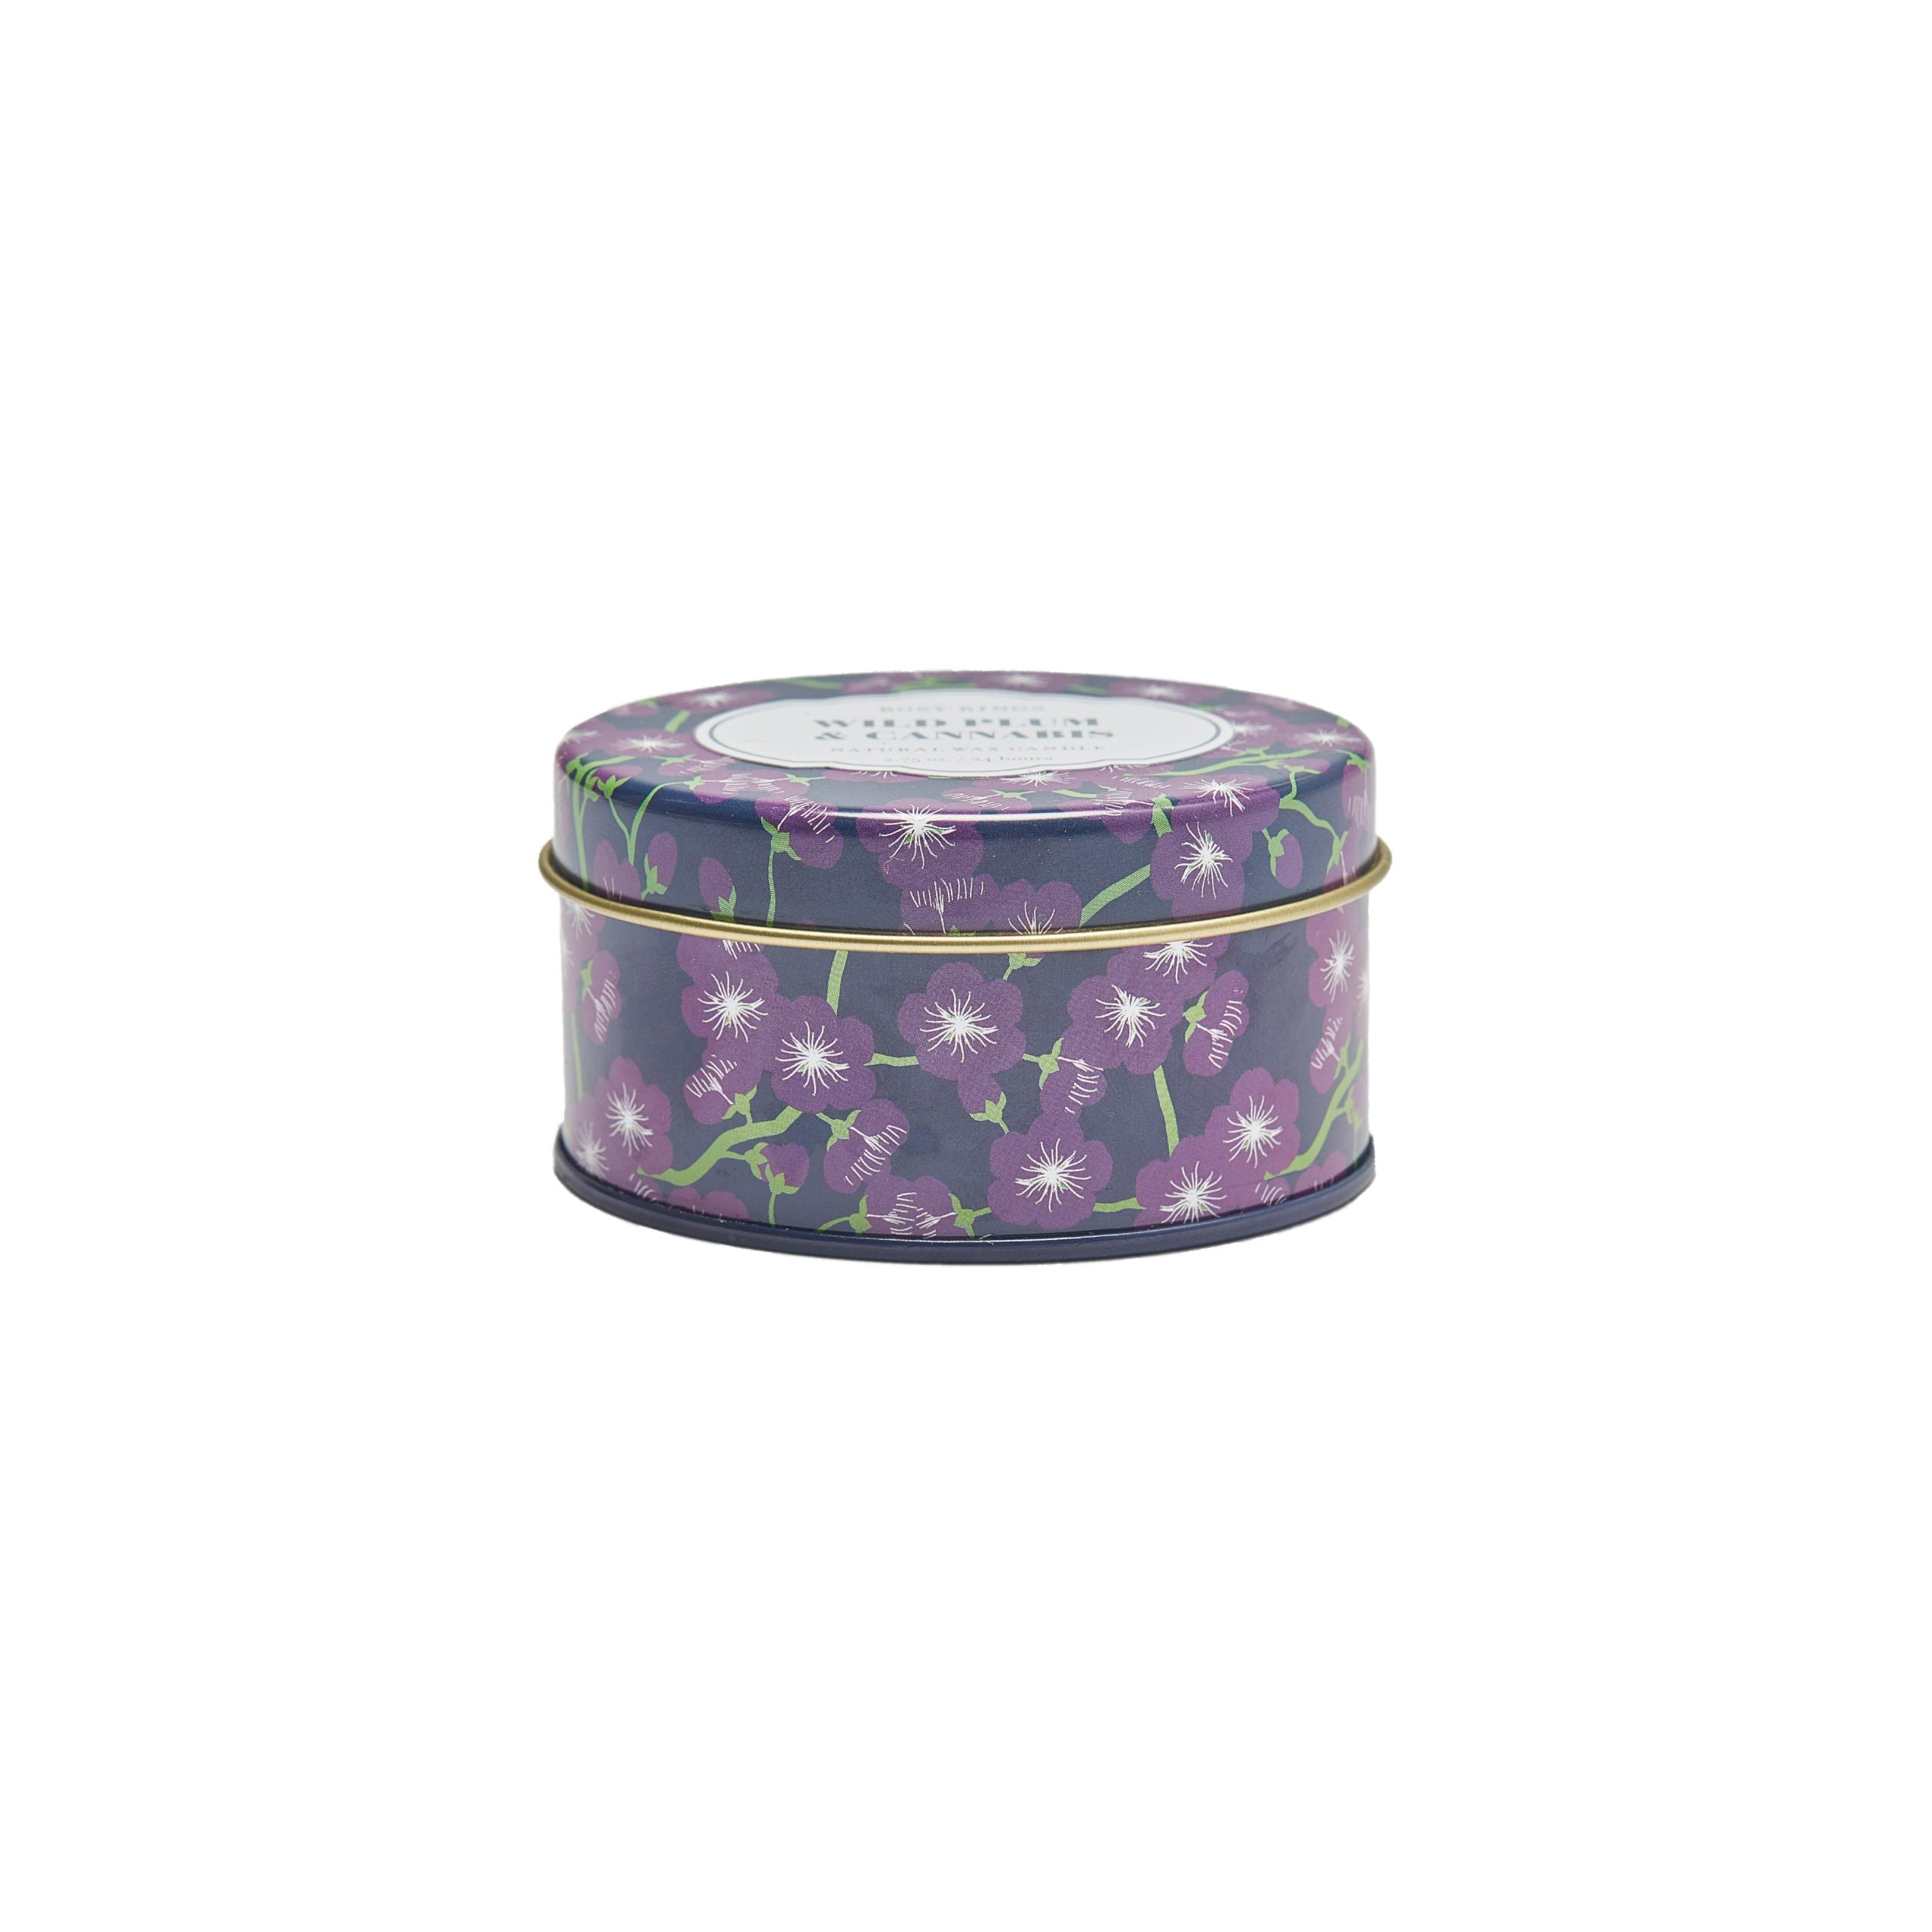 Rosy Rings Wild Plum & Cannabis Travel Tin Candle